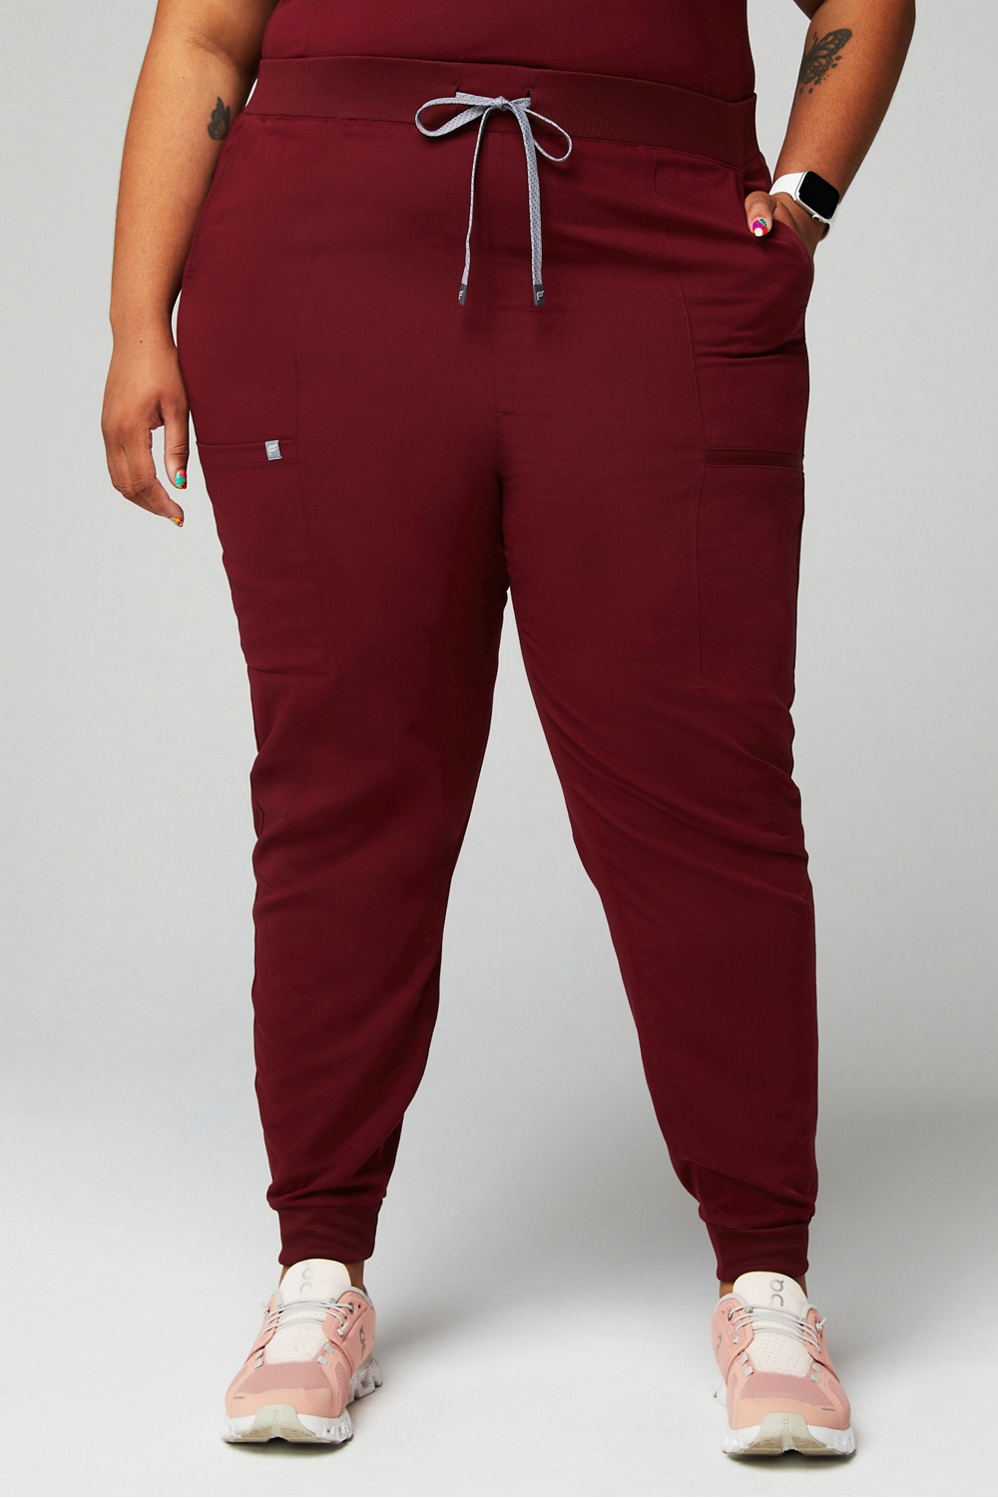 Fabletics  when your Fabletics set matches your glass of red wine